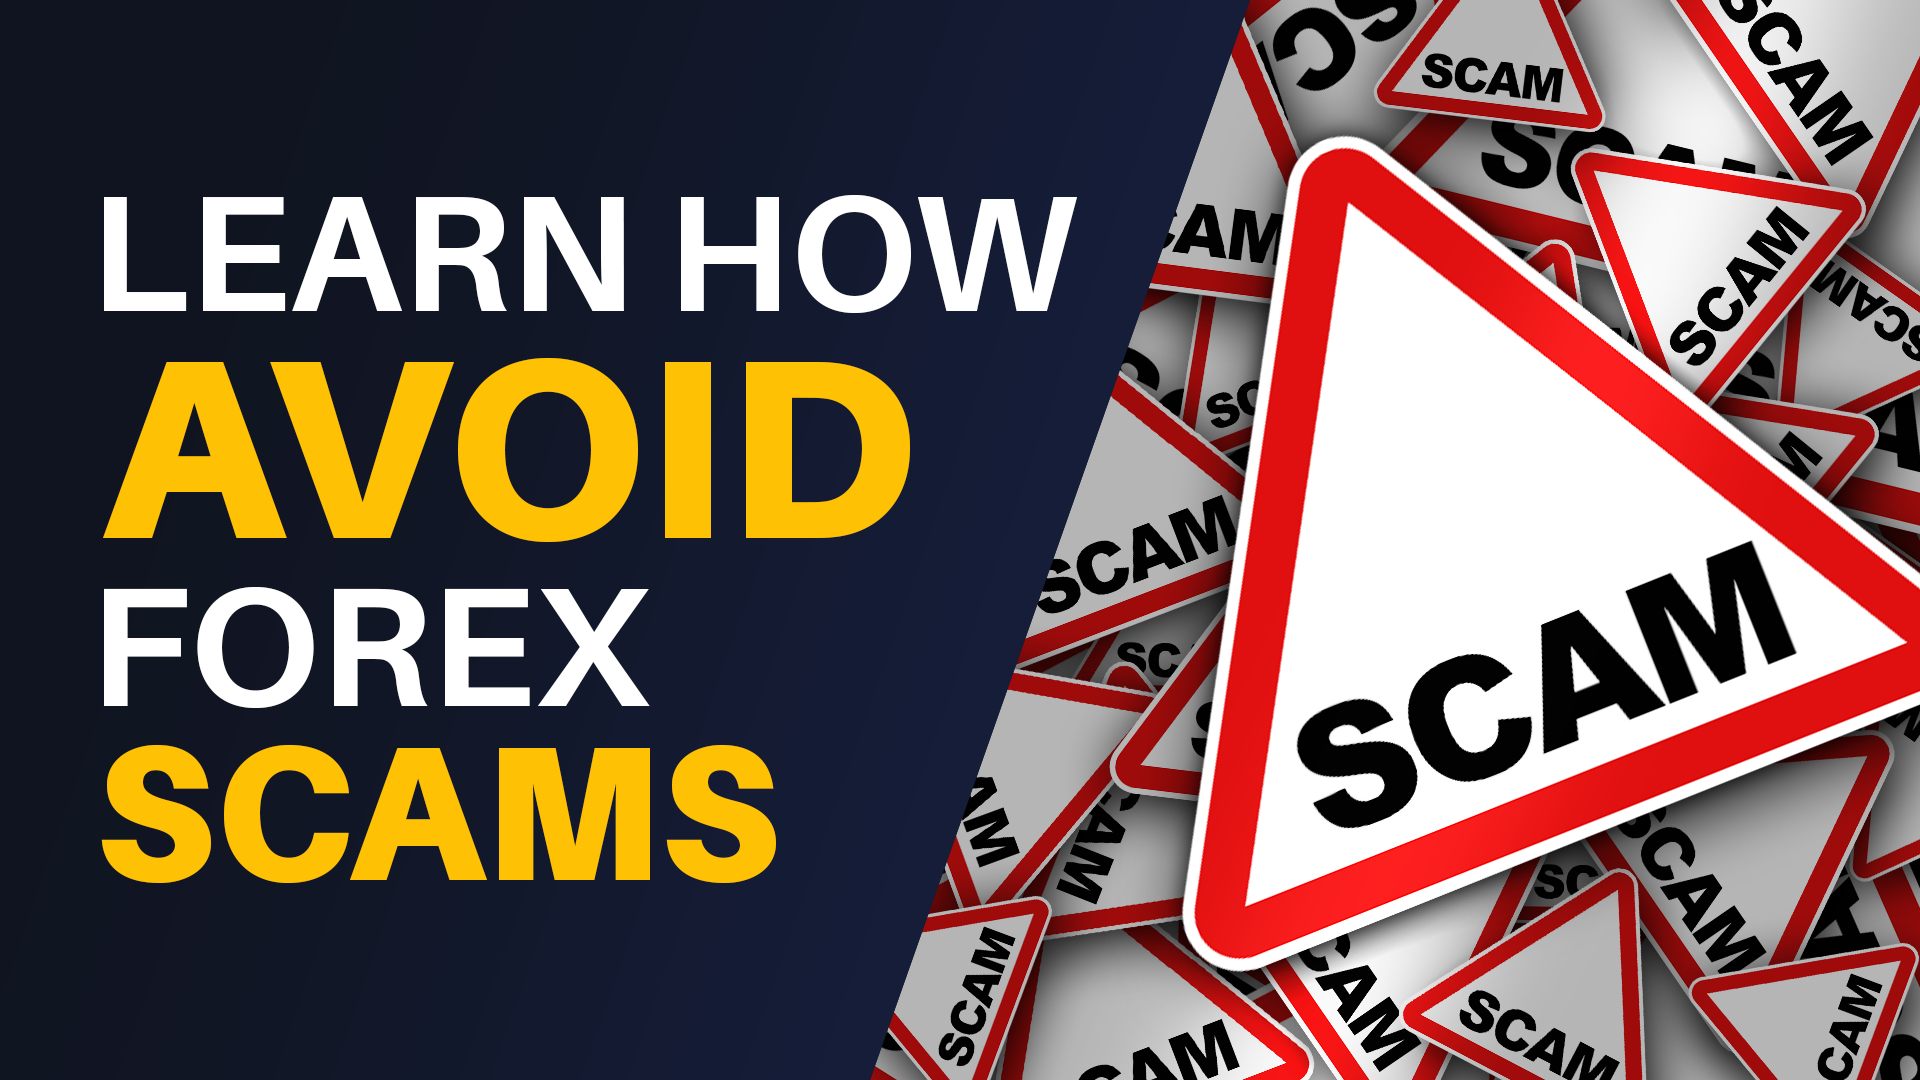 Tips to Avoid Forex Scams and Frauds